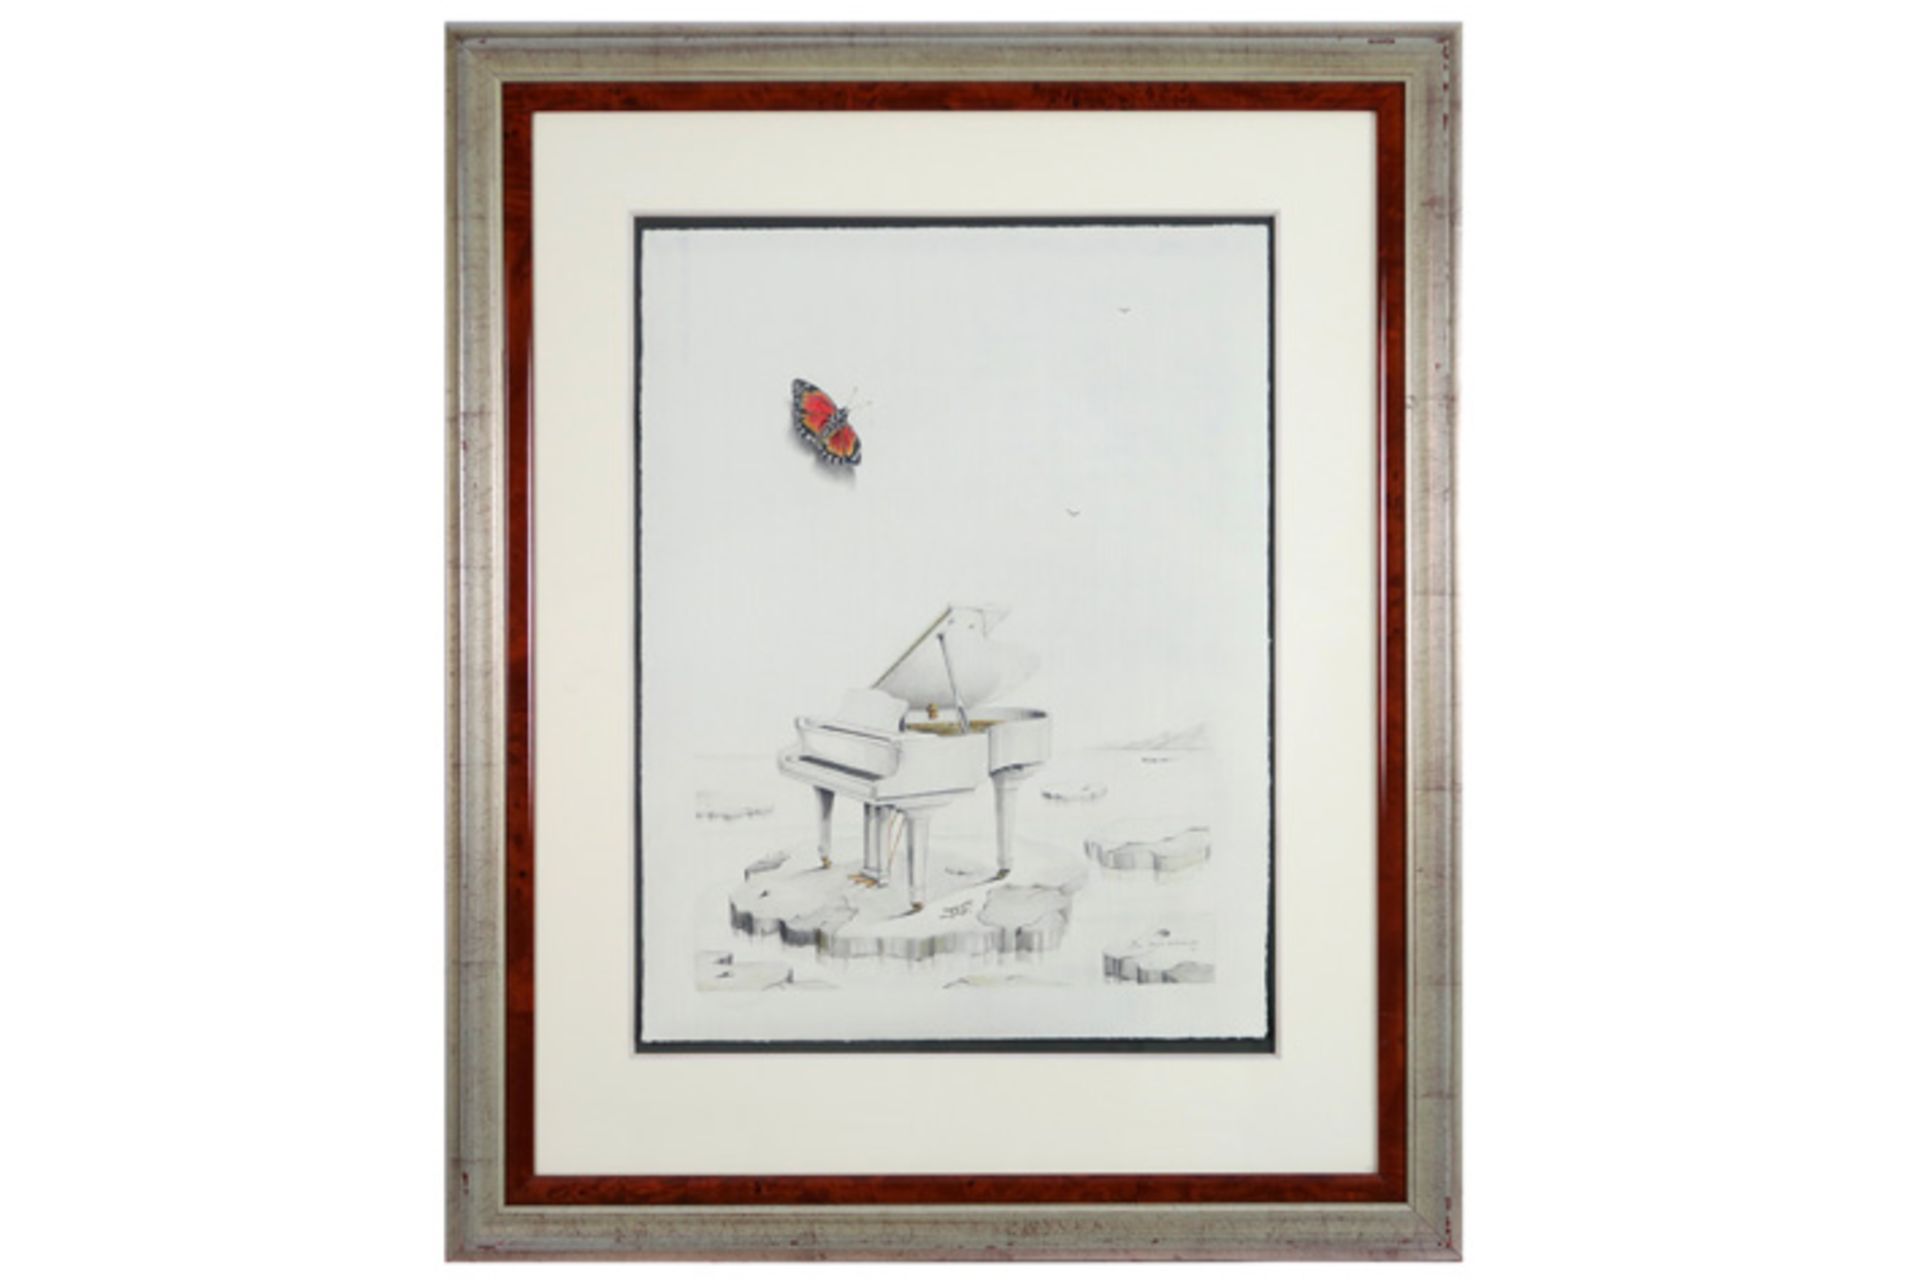 20th Cent. Dutch pencil drawing - signed Wim Mast de Gooijer and dated (19)91||MAST DE GOOIJER - Image 3 of 3